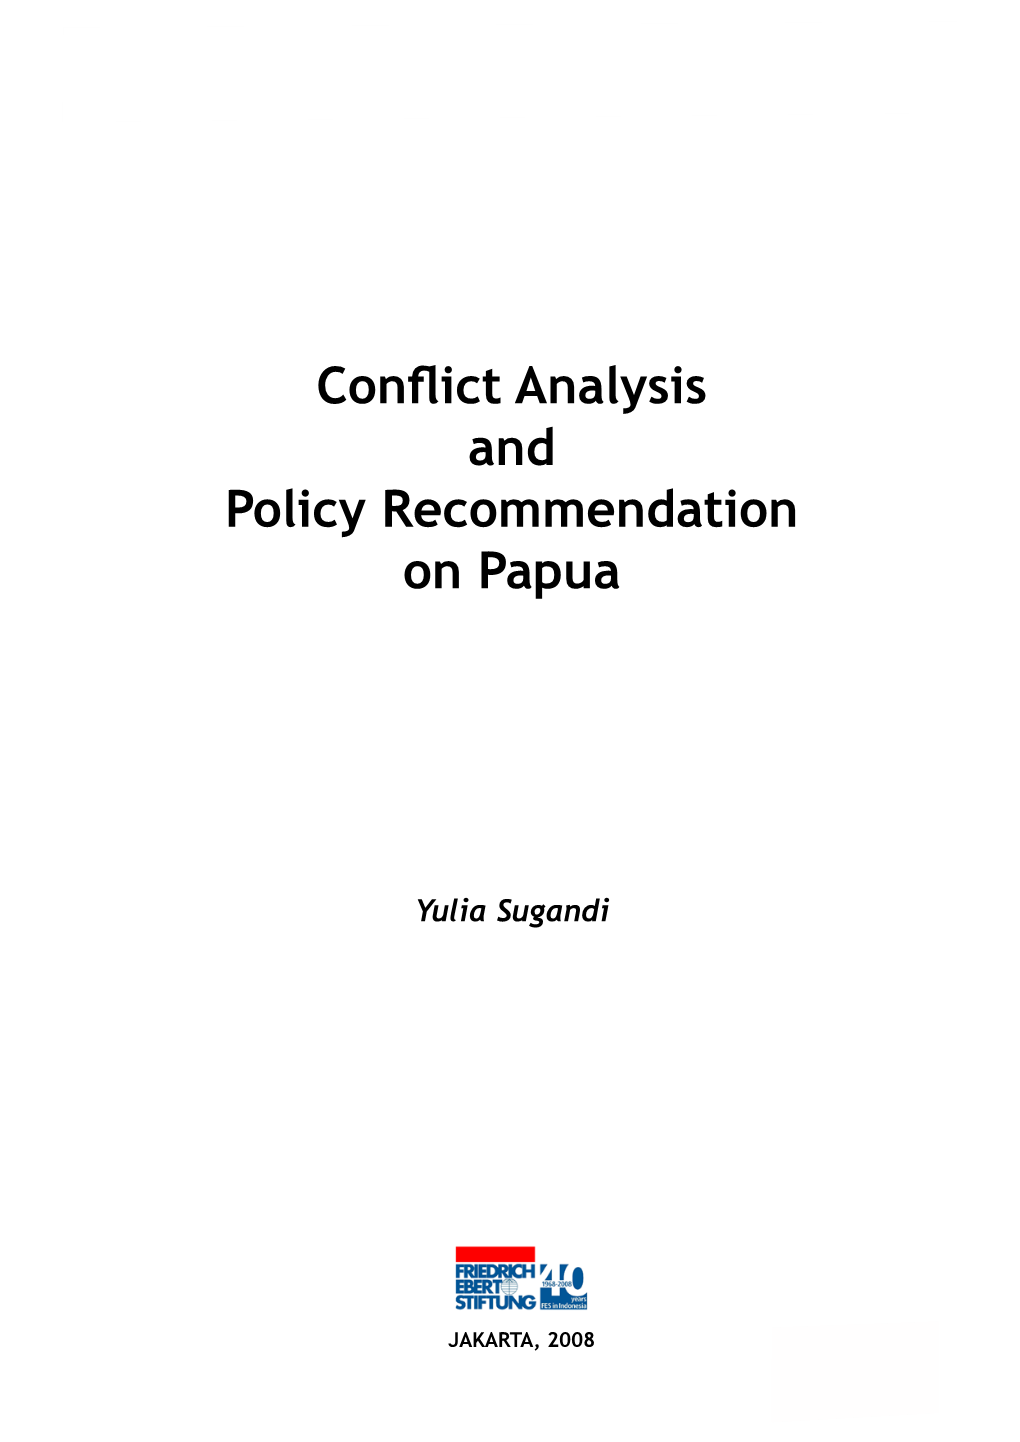 Conflict Analysis and Policy Recommendation on Papua